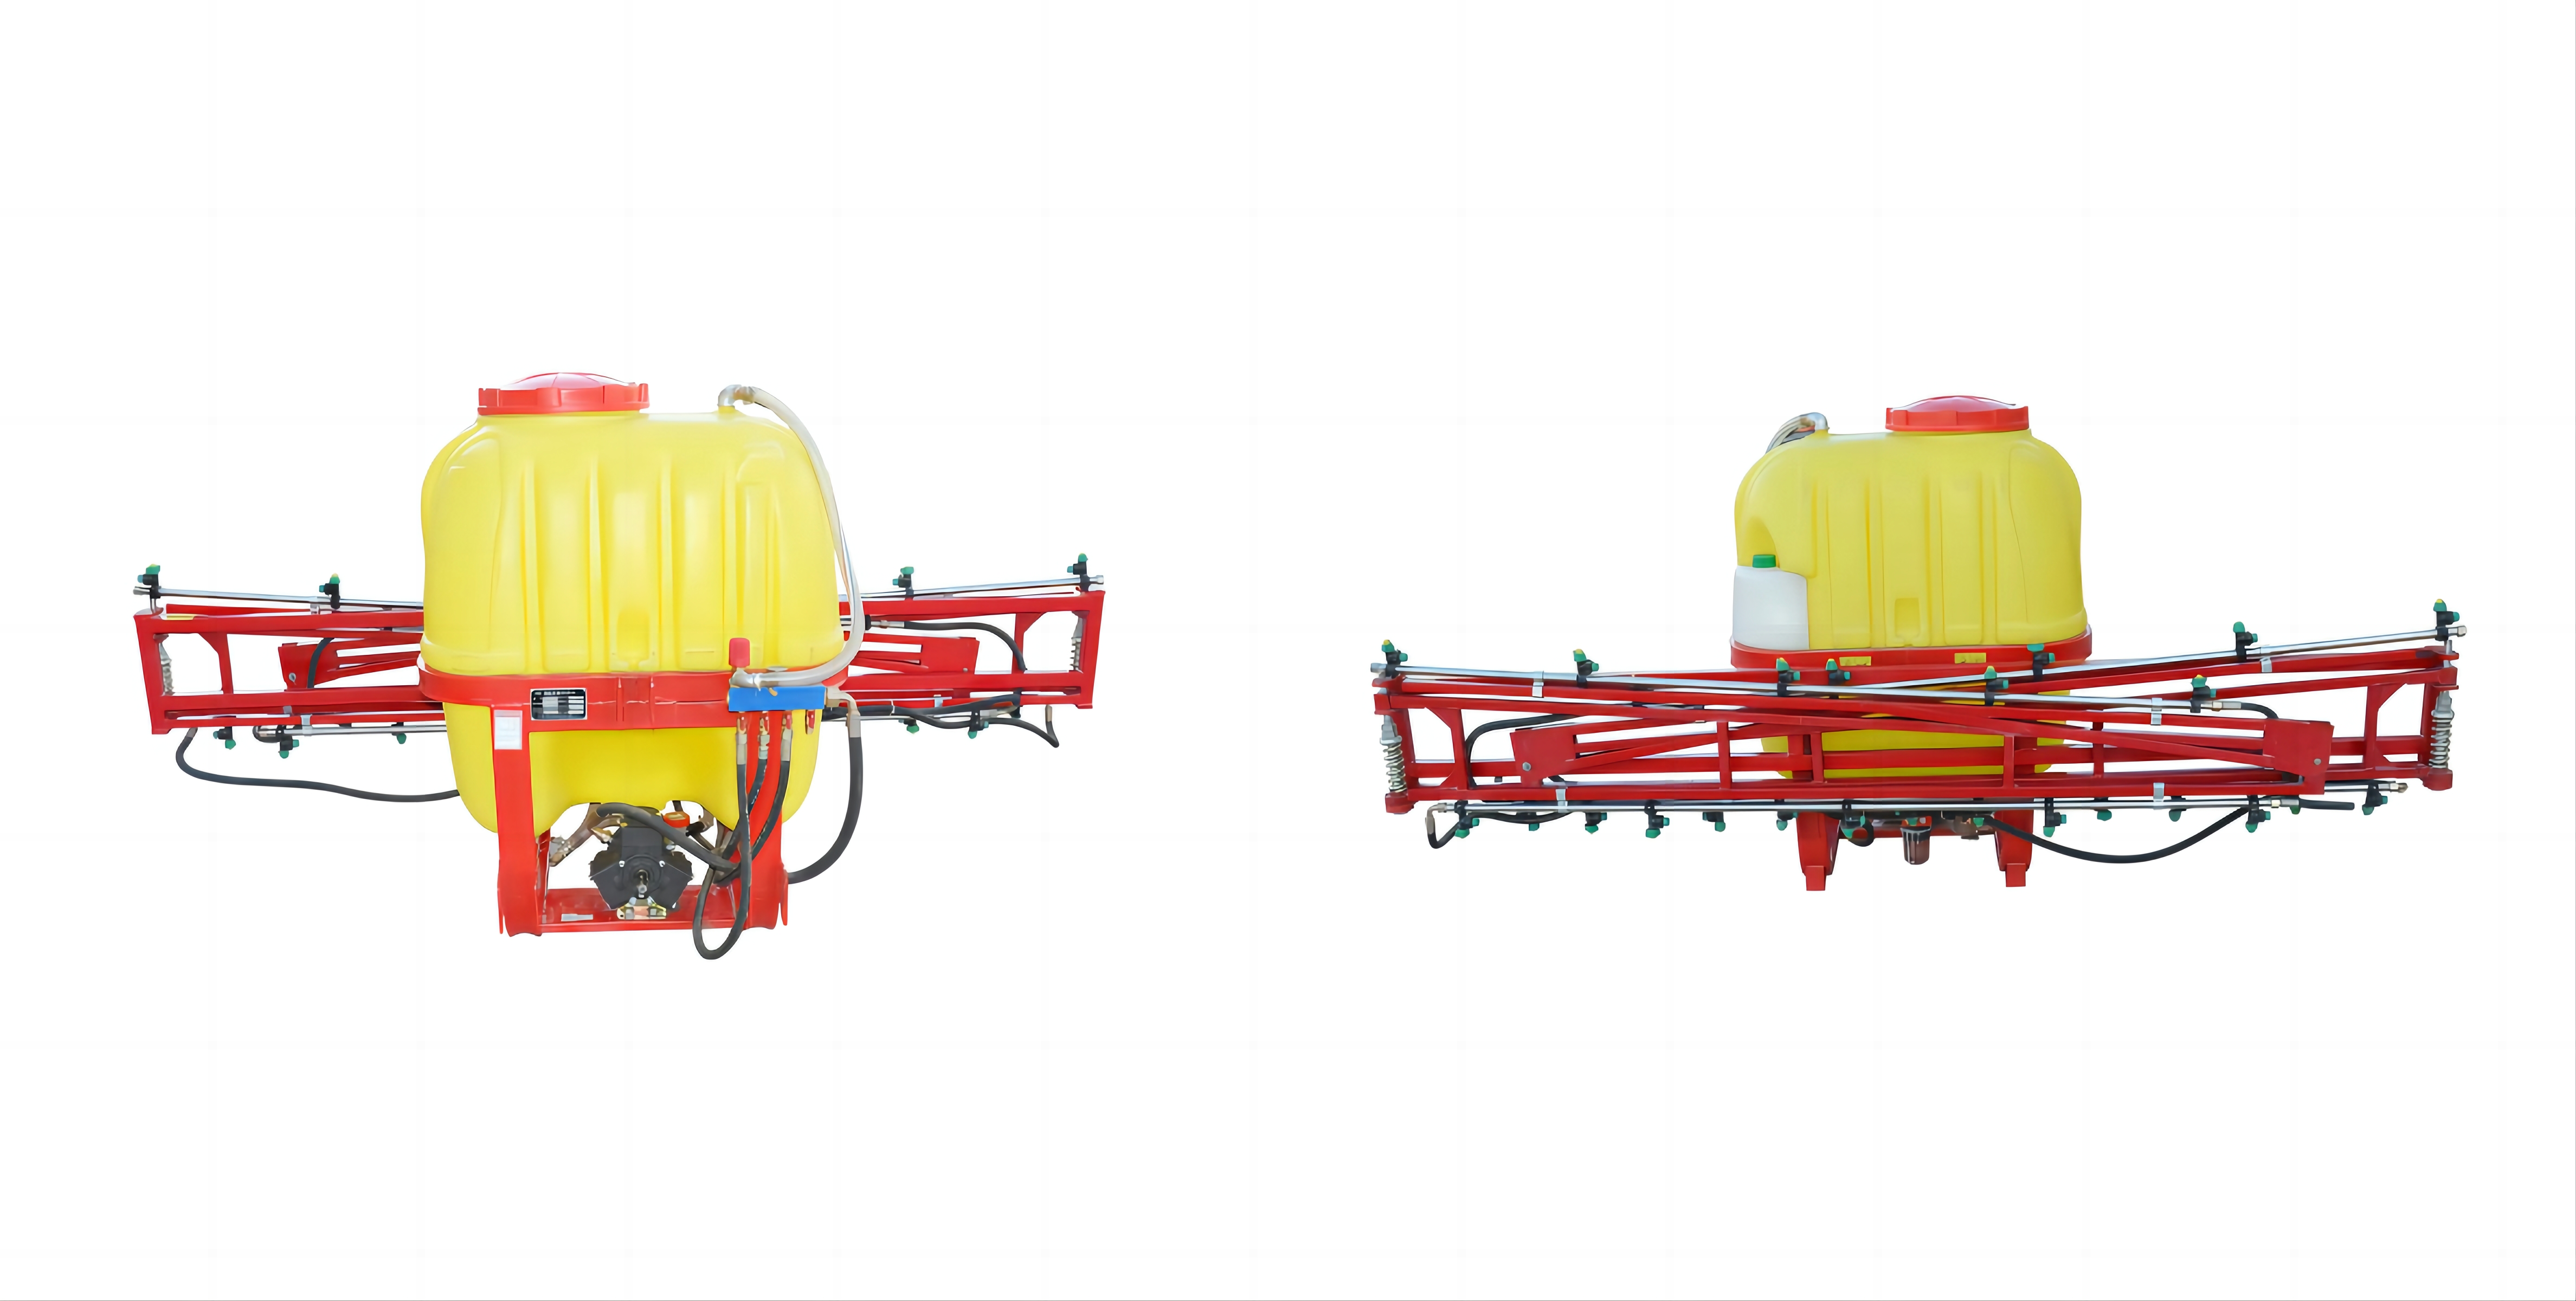 How to maintain the boom sprayer?